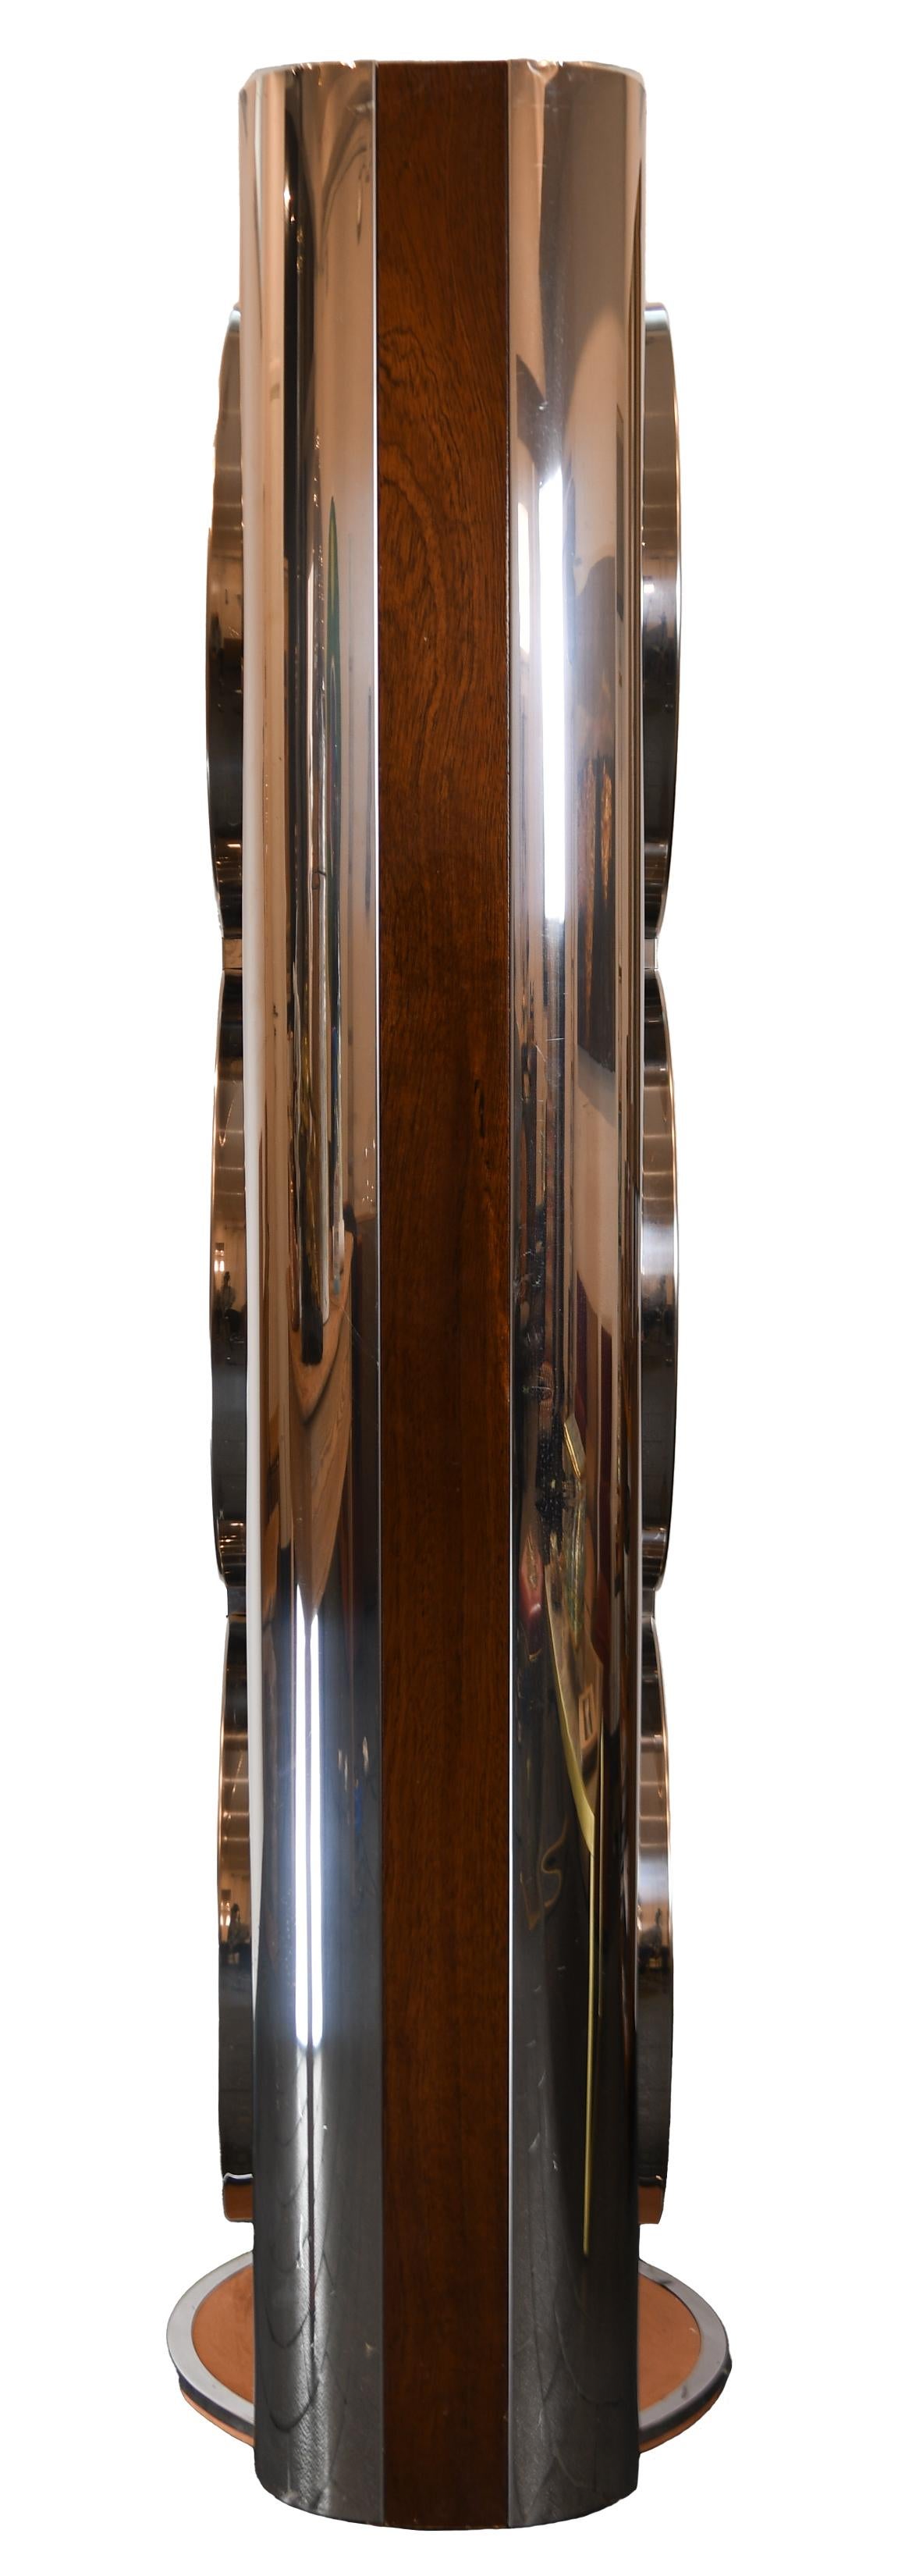 Italian Willy Rizzo Rotating Display Case in Laminated Wood, Stainless Steel and Glass